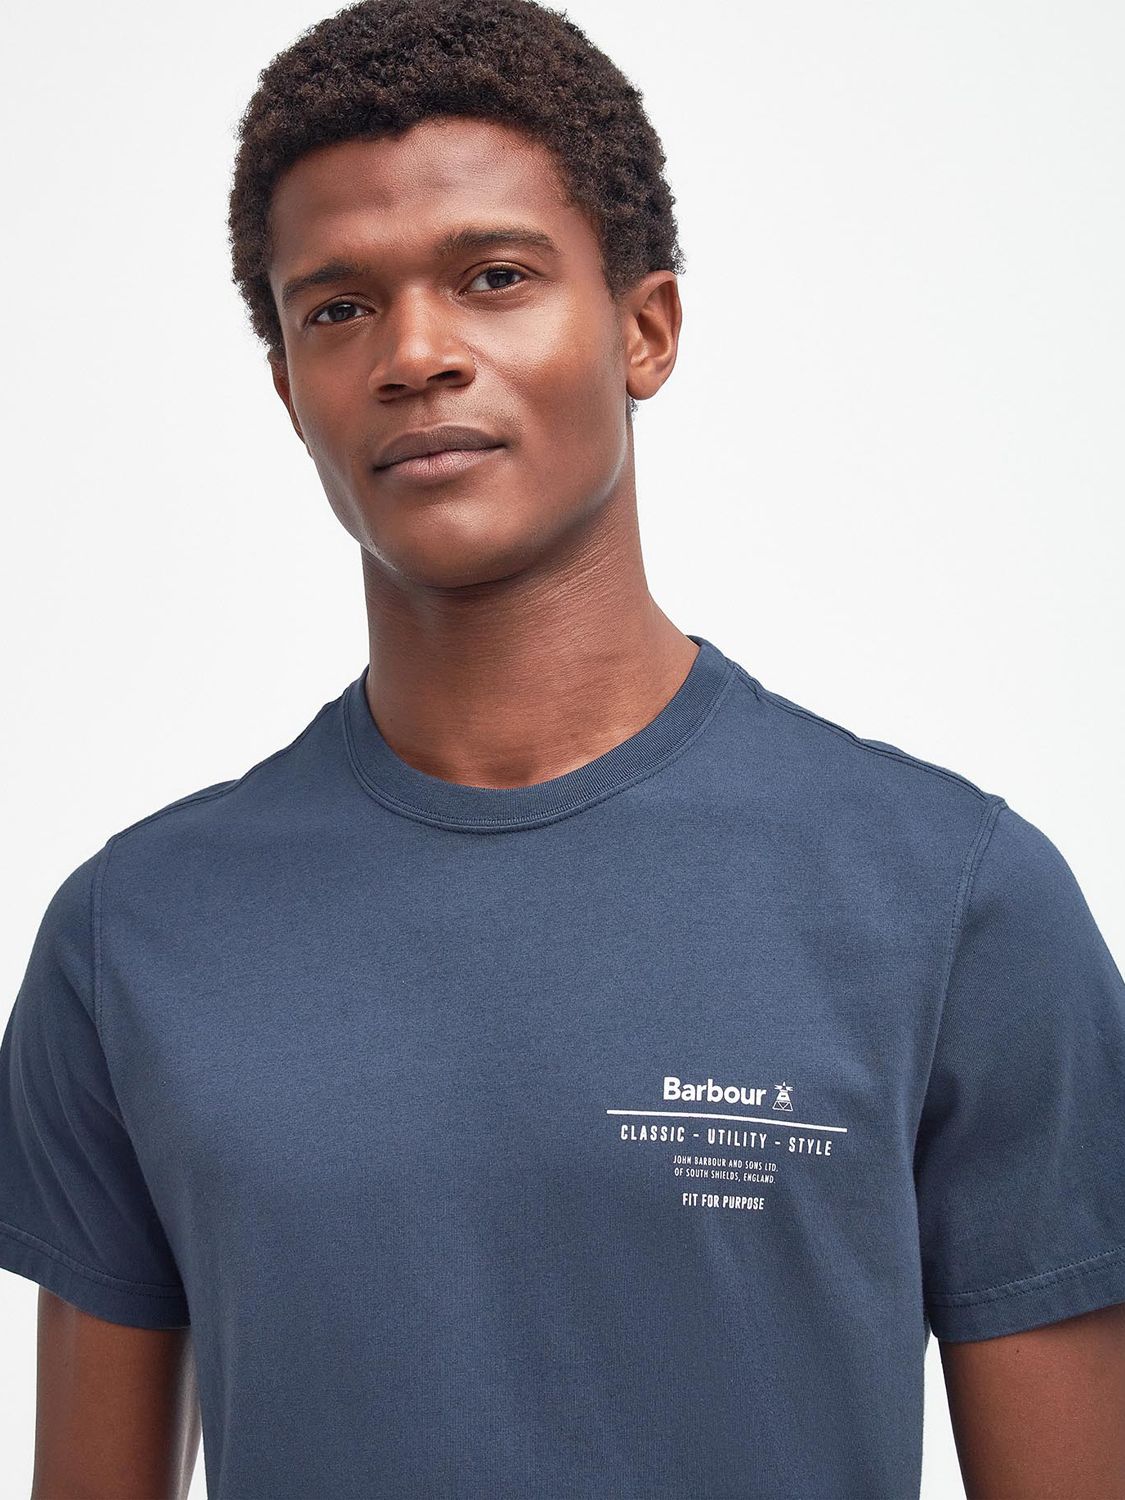 Barbour Hickling T-Shirt, Navy at John Lewis & Partners